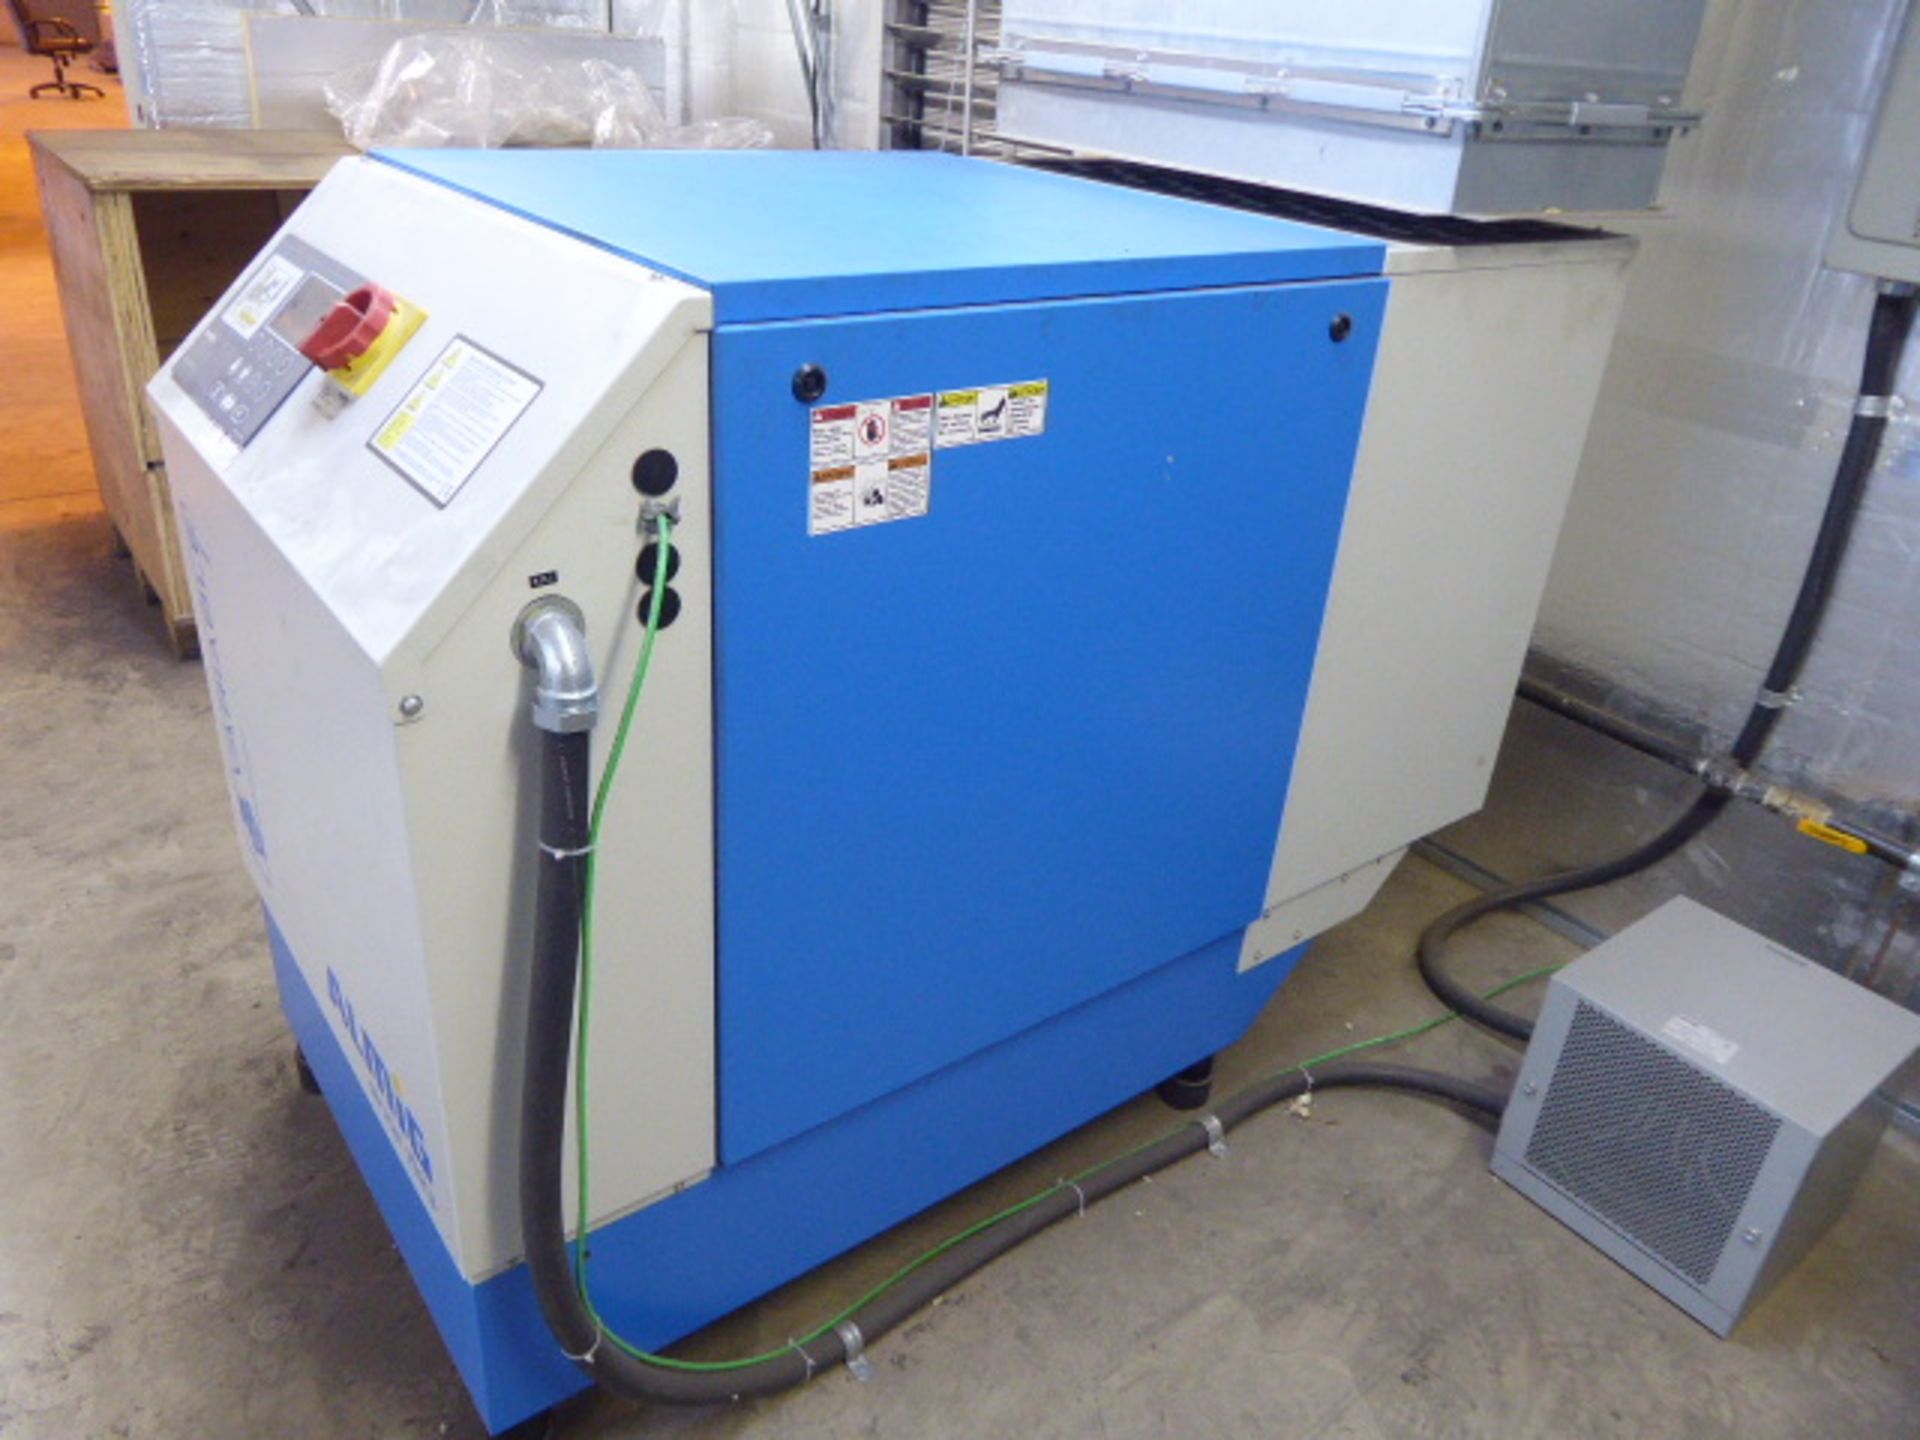 2014 Almig Air Compressor w/Shed, 30-HP, m/n Variable 24/30, s/n F1400112/S0027845 - Image 2 of 6